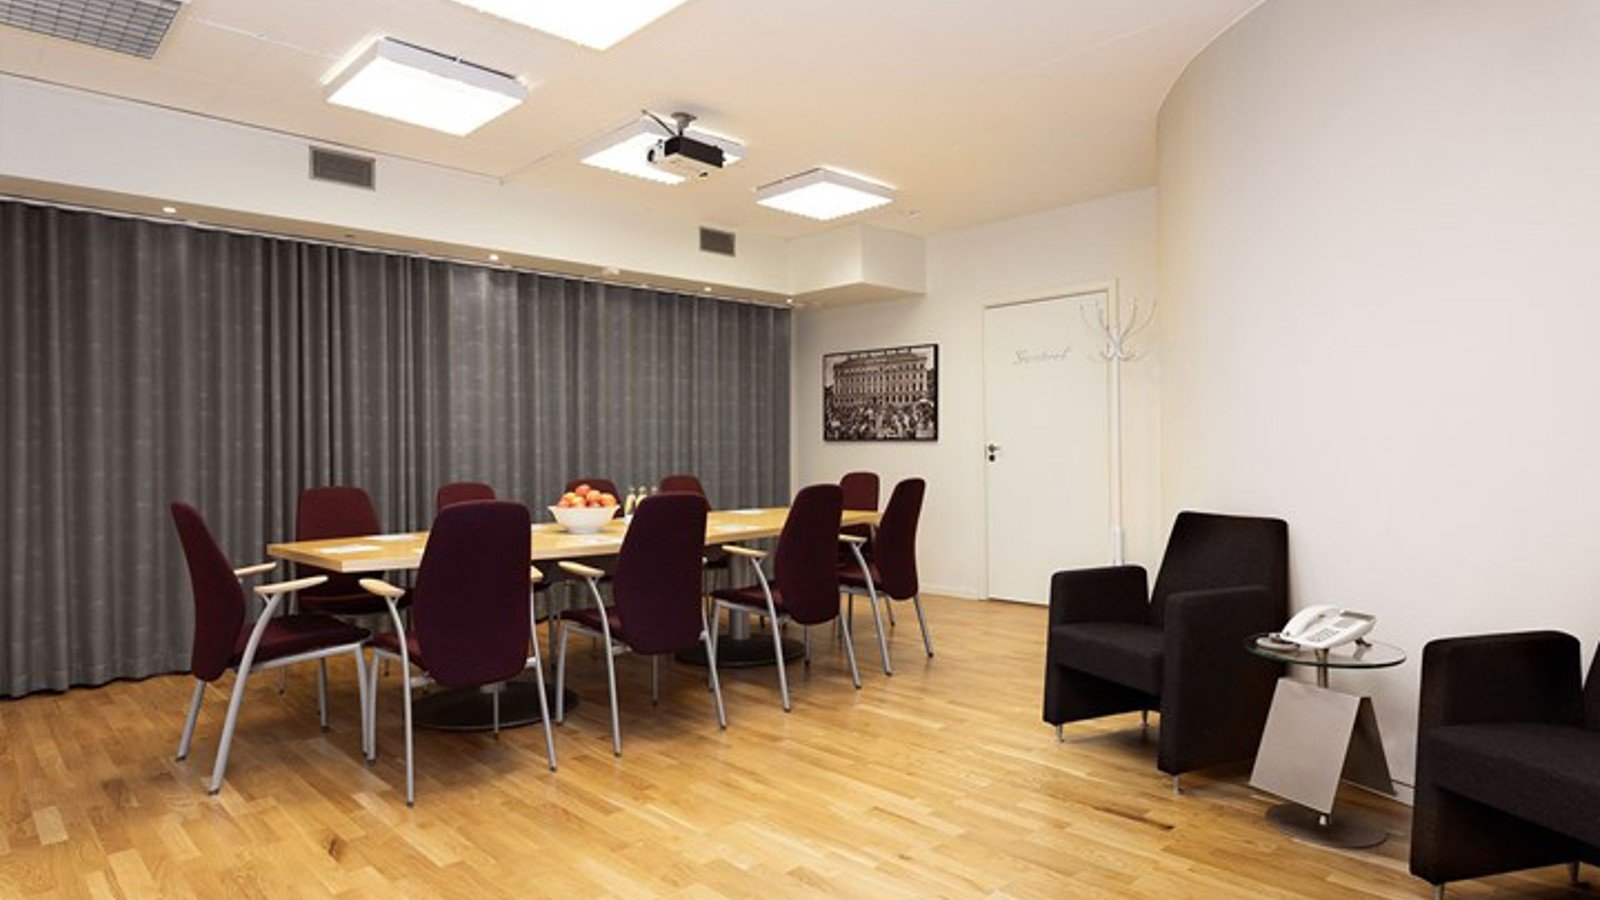 Group room with board seating, wooden floor and white walls